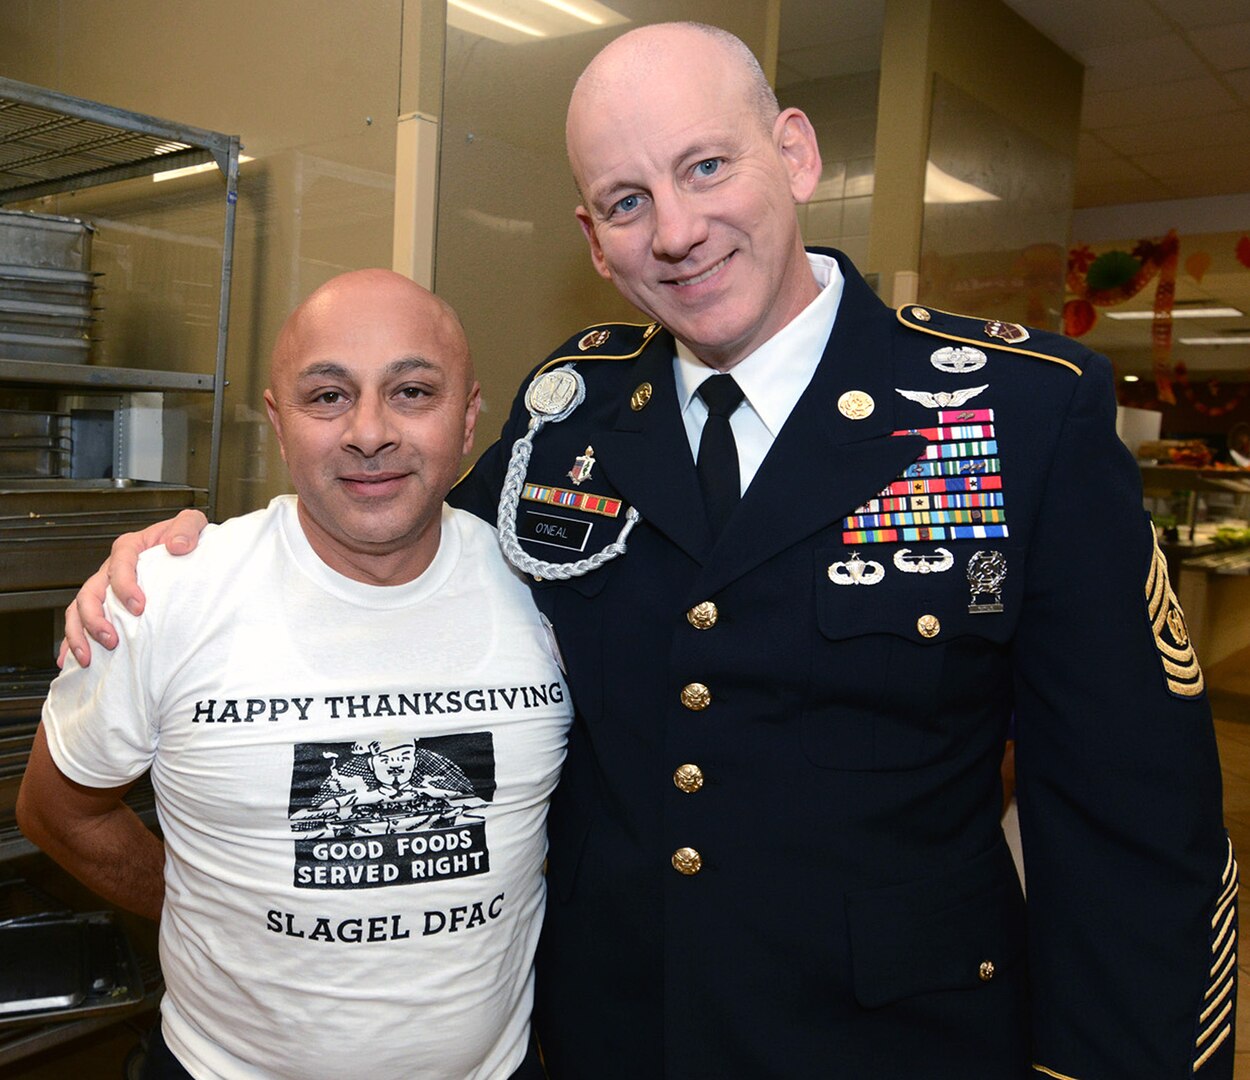 Maj. Gen. Patrick D. Sargent and Command Sgt. Maj. Buck O'Neal, along with other U.S. Army Medical Center of Excellence leaders, served Thanksgiving luncheon to Soldiers at the Slagel Dinning Facility at Joint Base San Antonio-Fort Sam Houston Nov. 28. The time-honored military tradition of senior leaders serving Thanksgiving Day dinner to Soldiers is an example of how military service is like an extended family. For many, this is their first time away from home and their first holiday away from home.